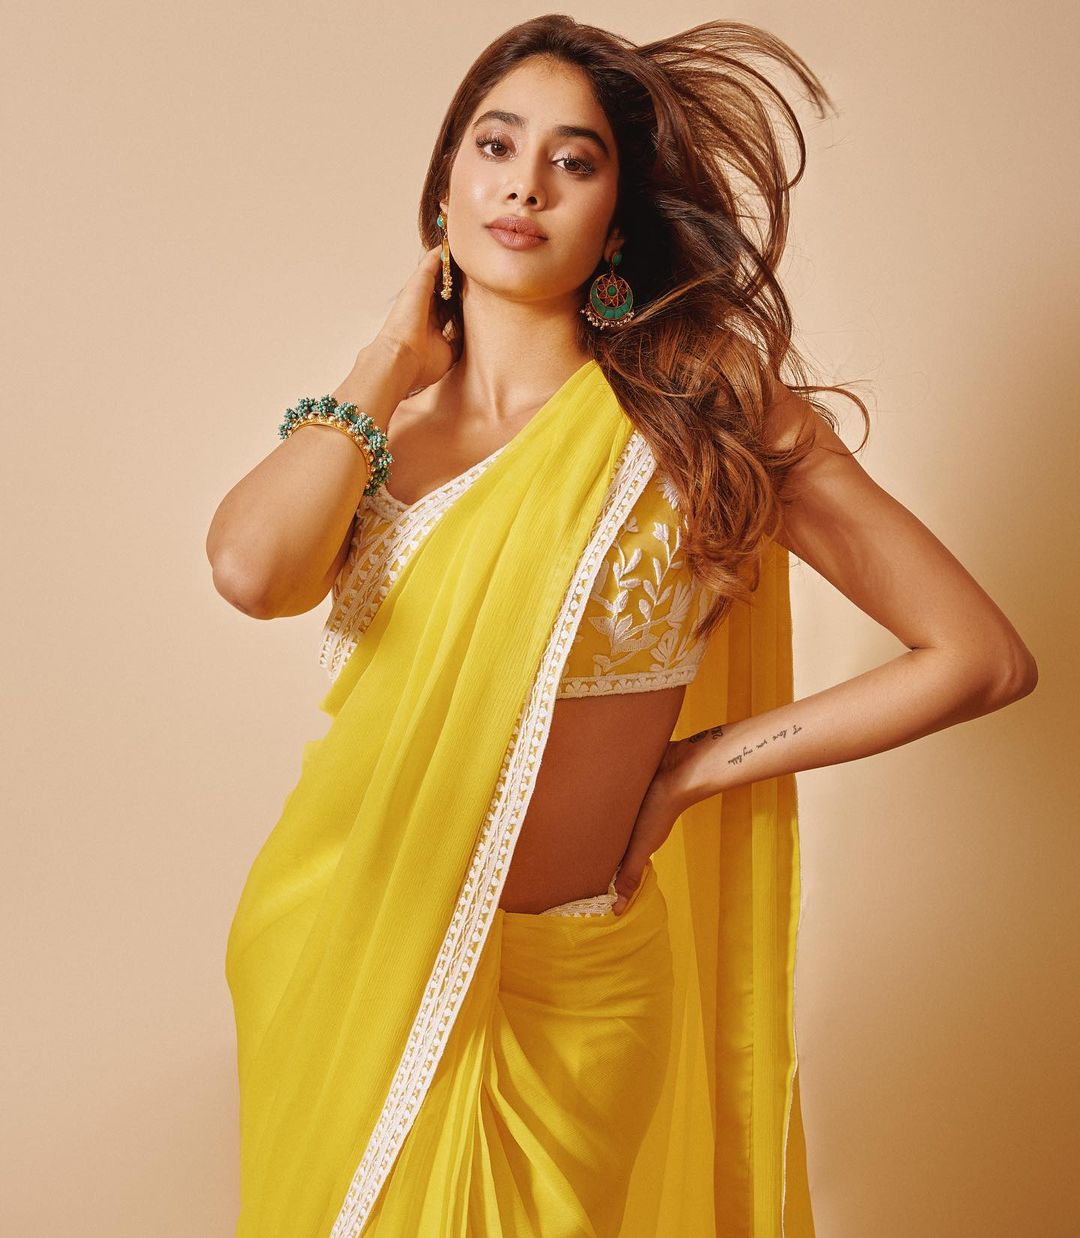 Janhvi Kapoor's plain yellow with the embroidered saree is festival-ready.